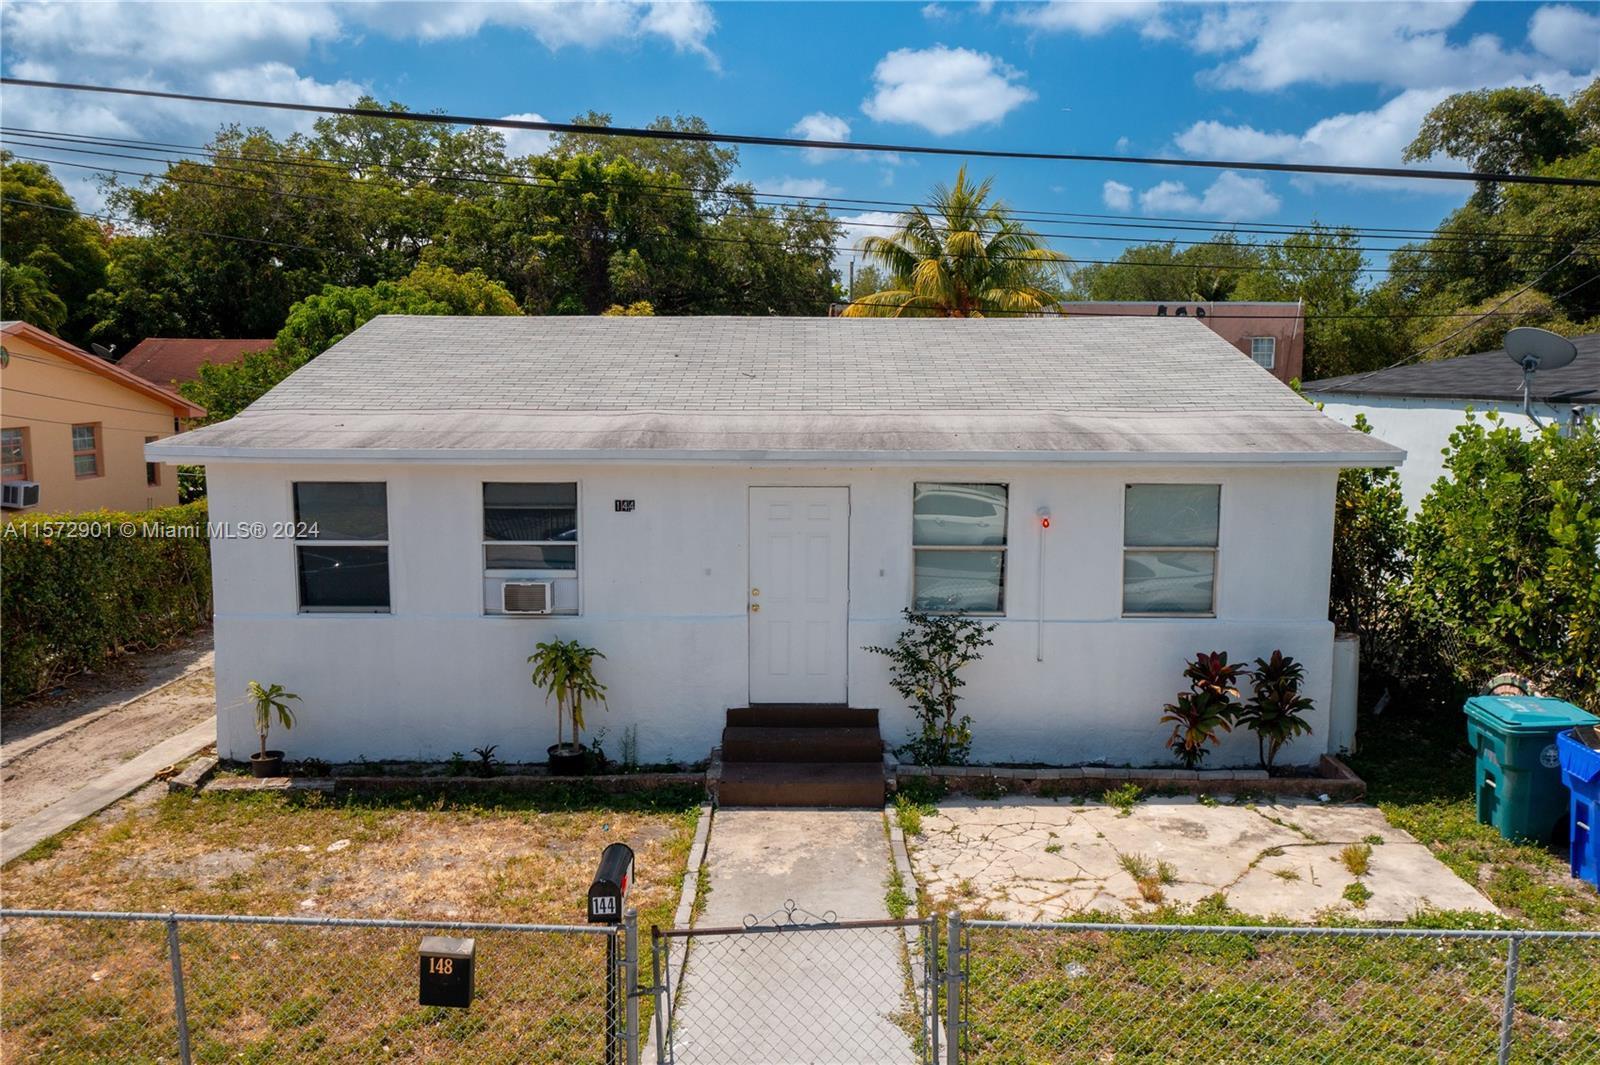 Photo of 144 NW 53rd St in Miami, FL